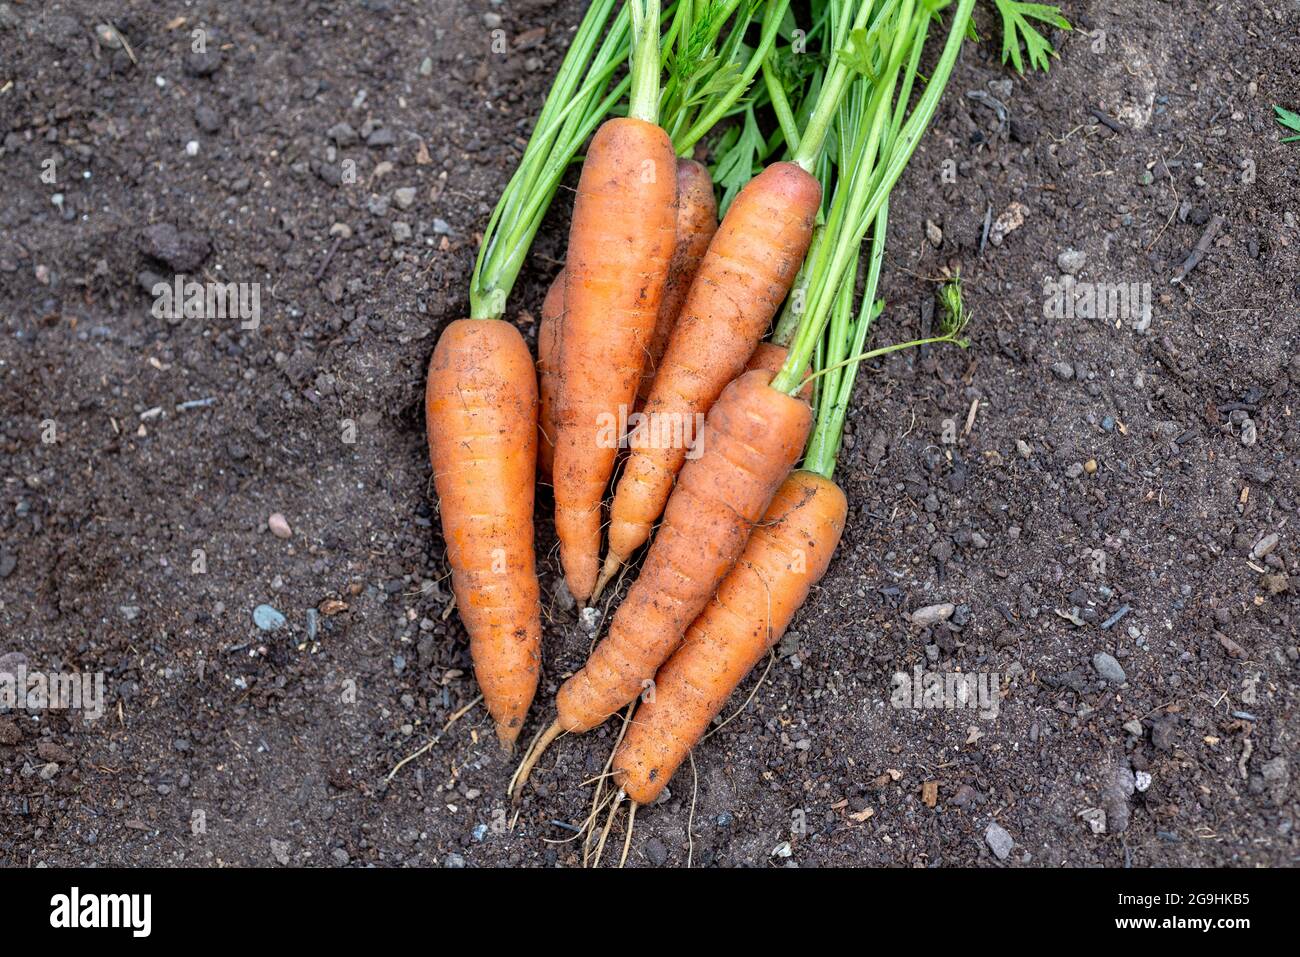 Carrots 'Resistafly' freshly harvested from a vegetable plot.  England, UK. Stock Photo